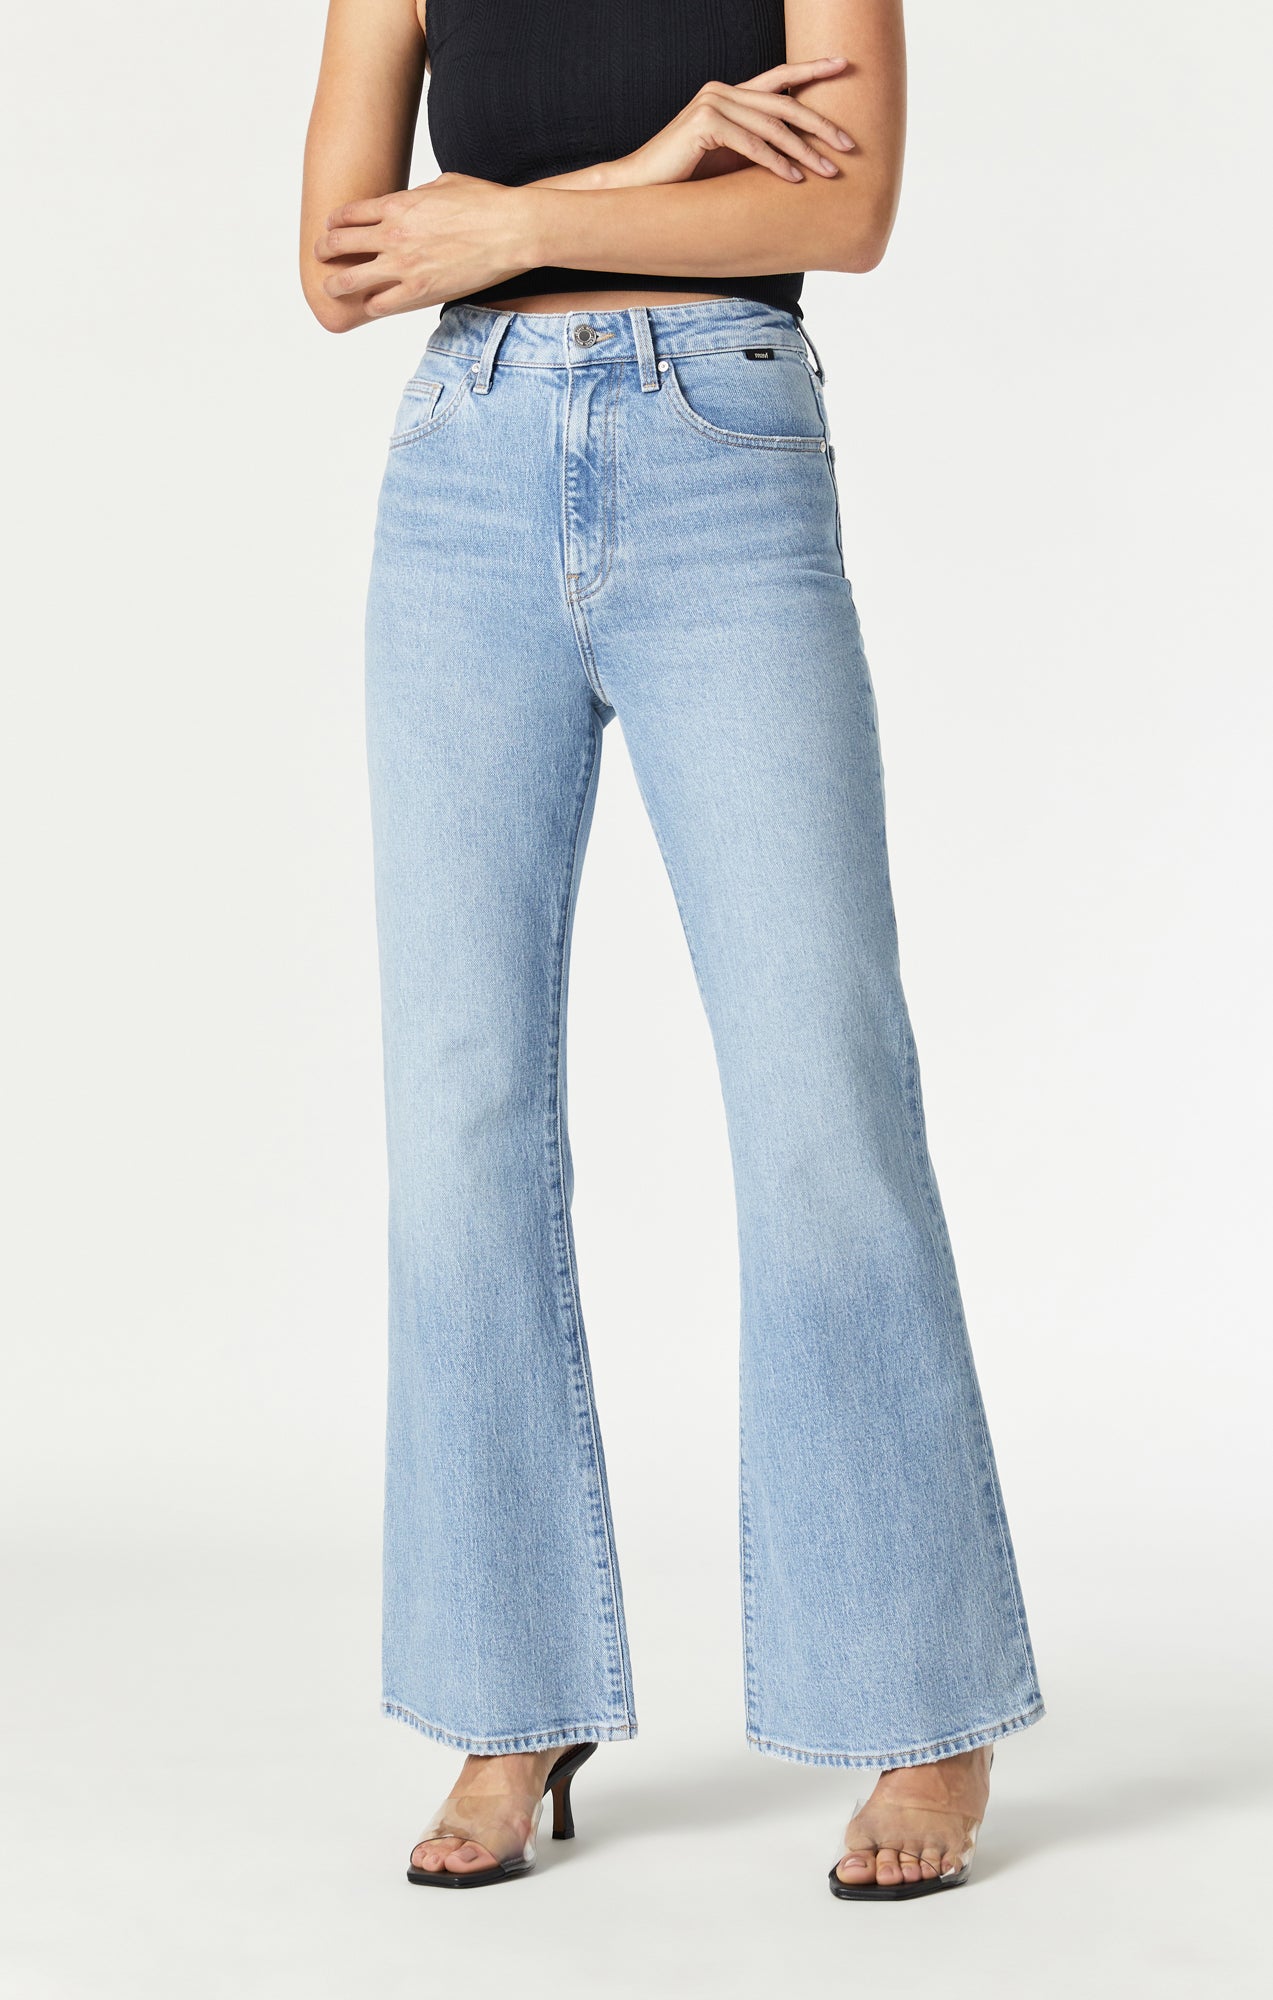 Women's Jeans with 34 Inch Inseams